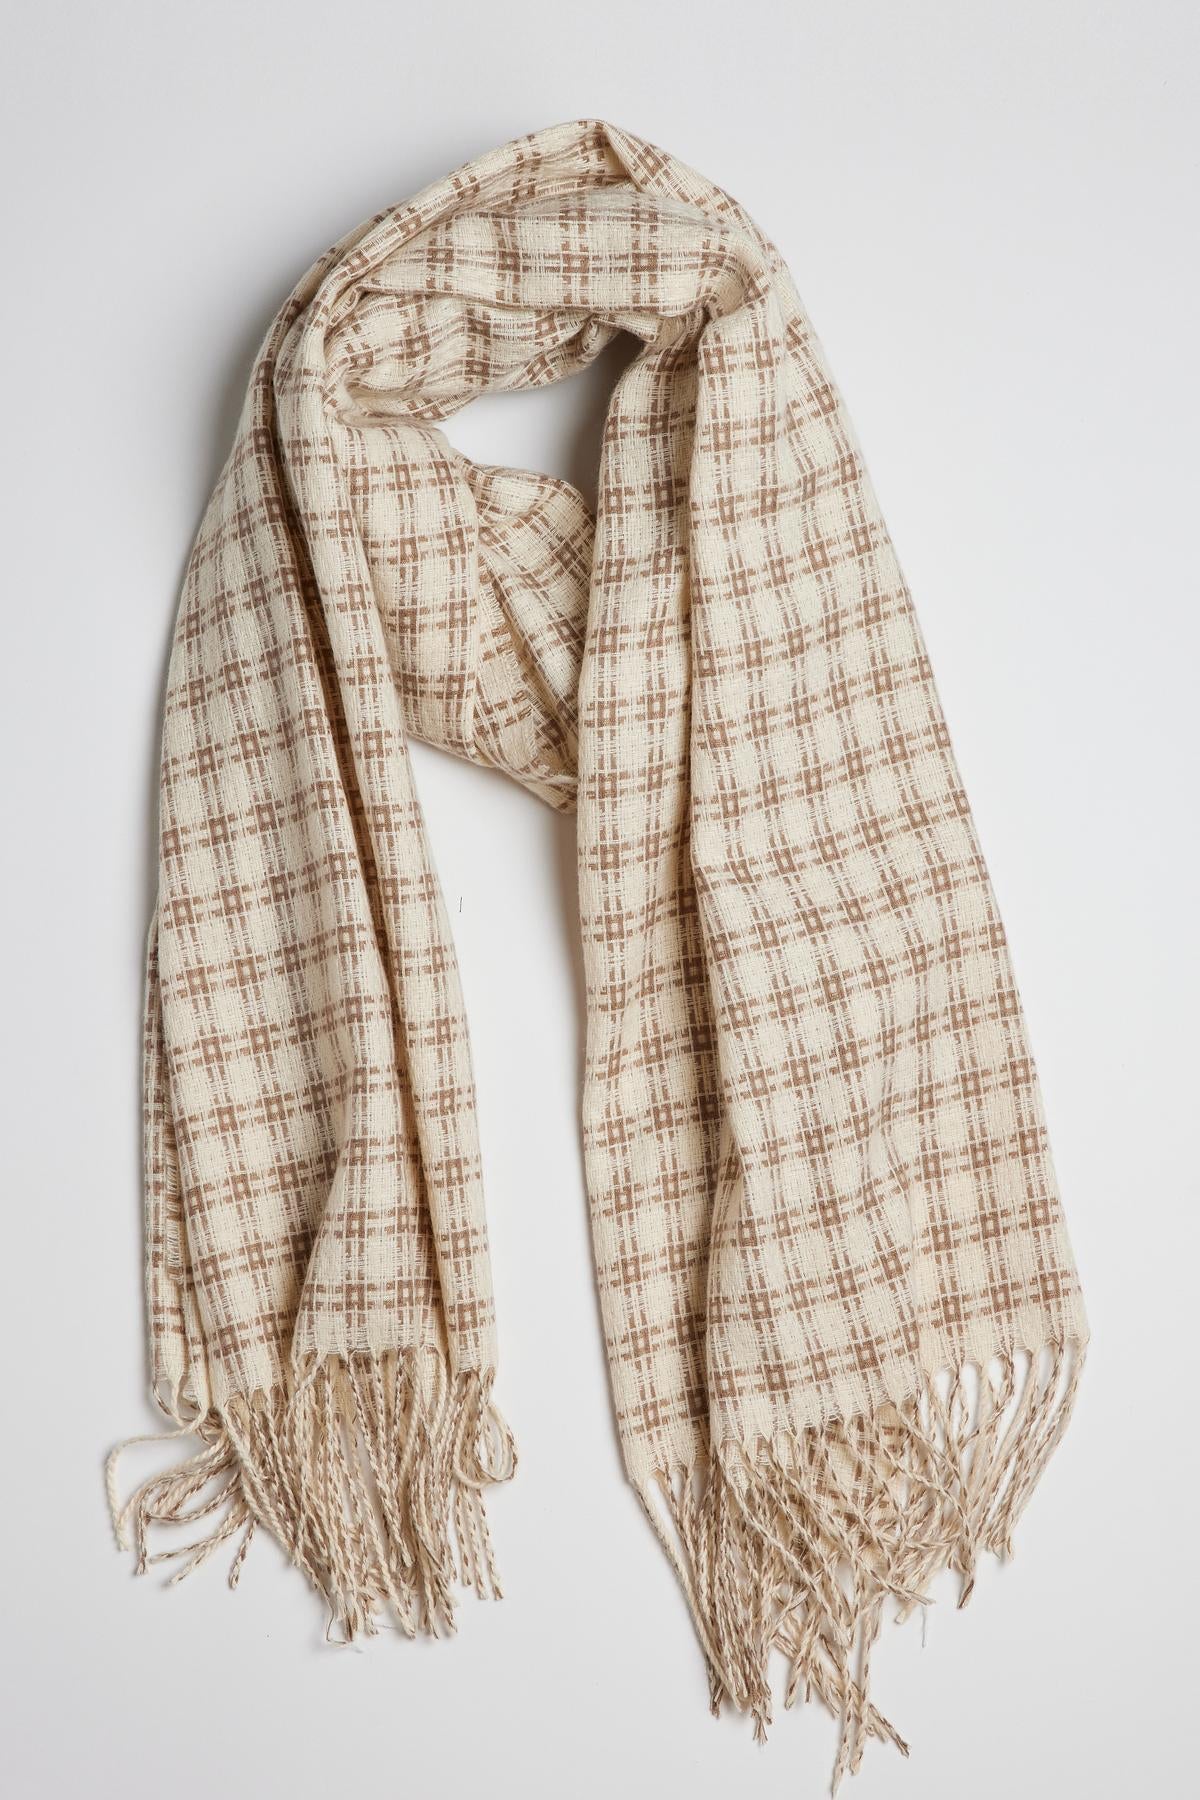 Twin Check Scarf in ivory and tan-26749529981121